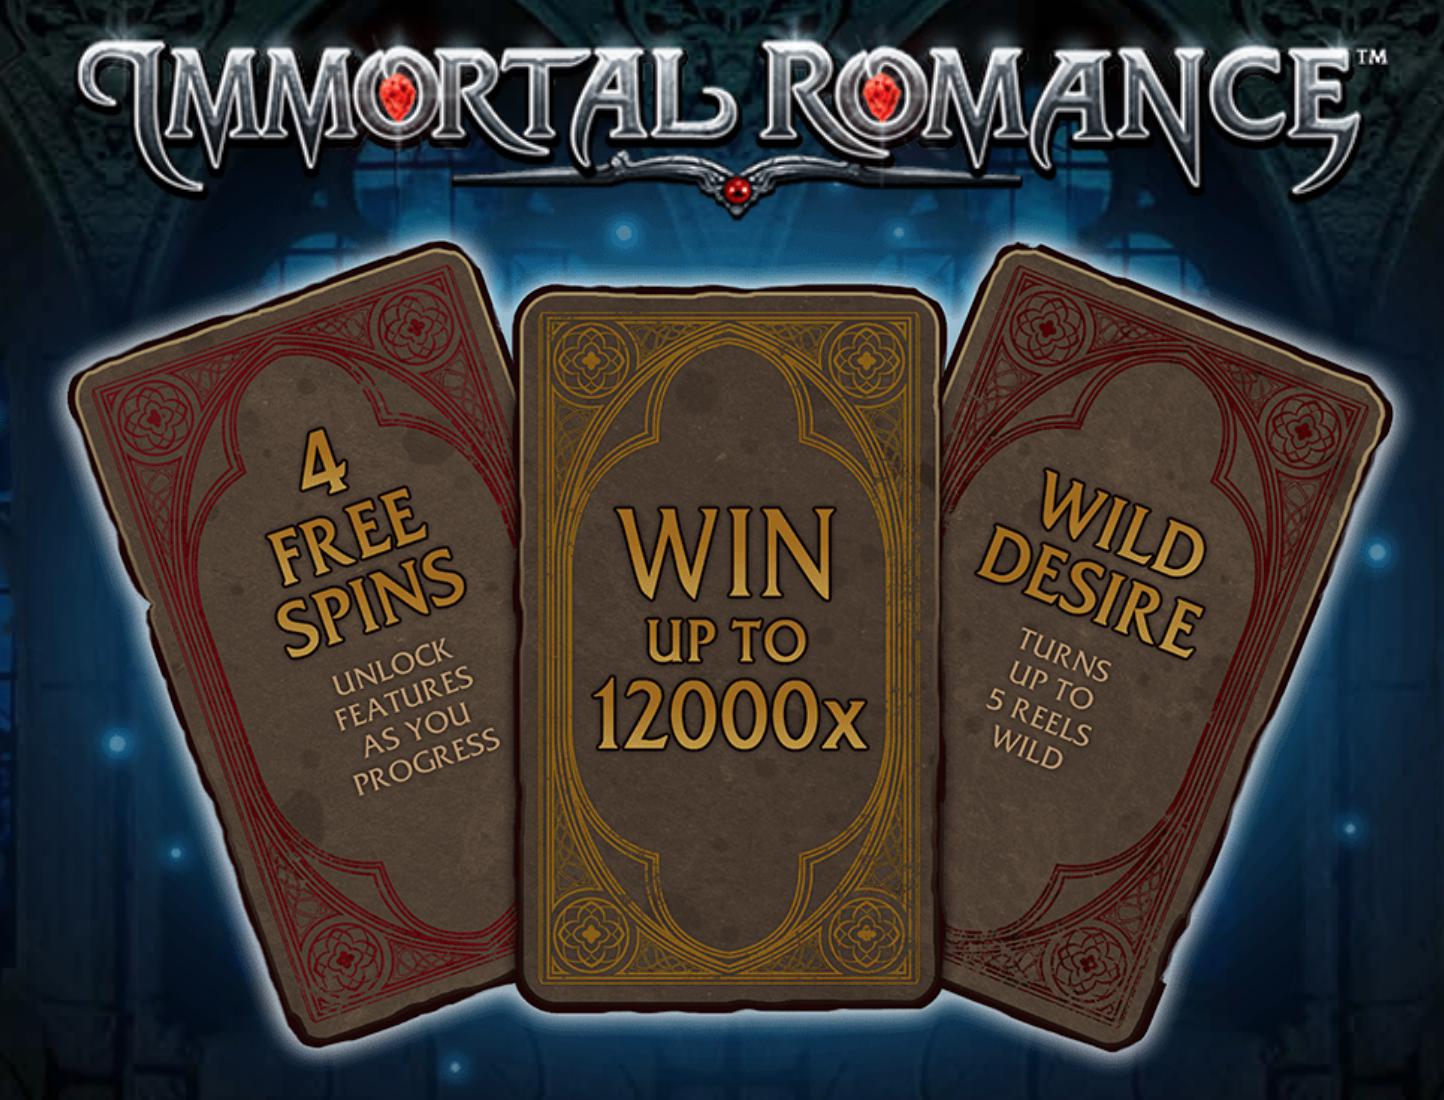 The Immortal Romance Slot Machine - What You Need to Know